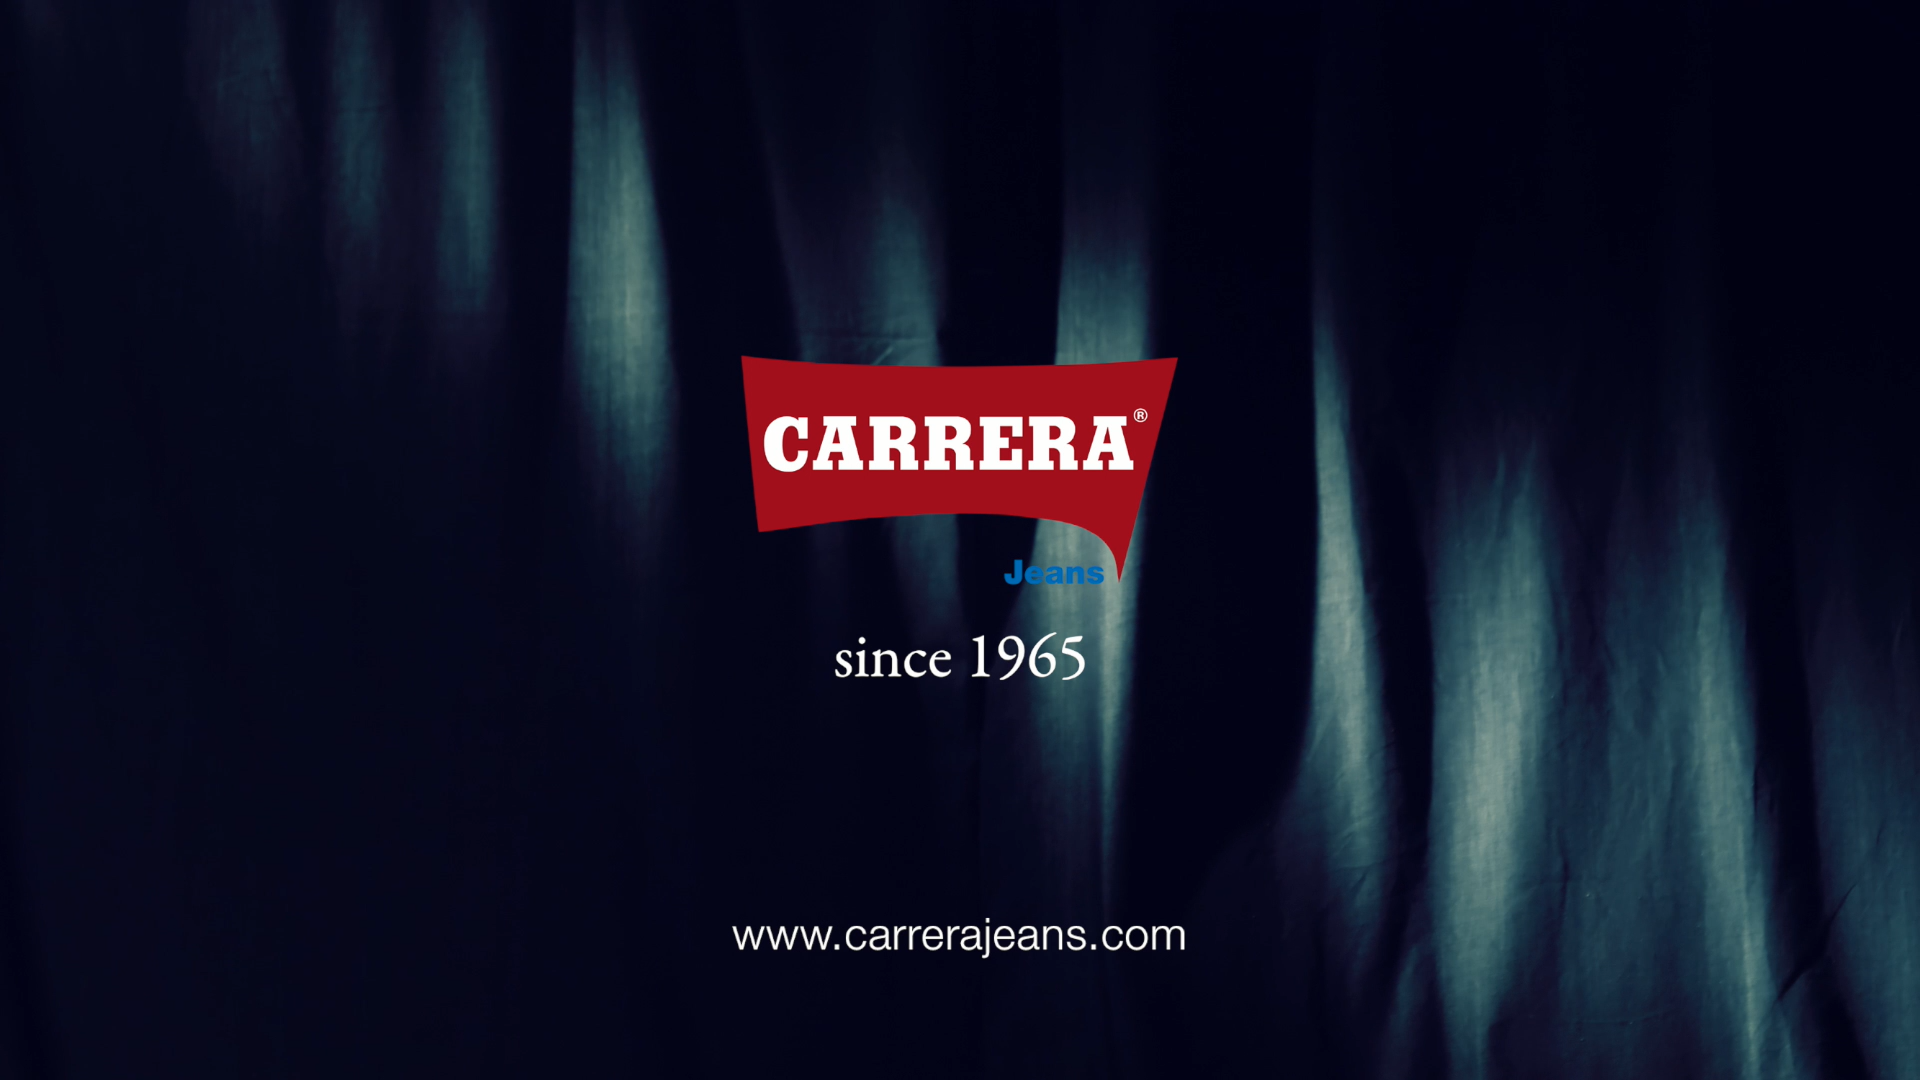 aircraft Baffle strange License Works ready to pull back the curtains and unleash Carrera Jeans in  India - Licensing International